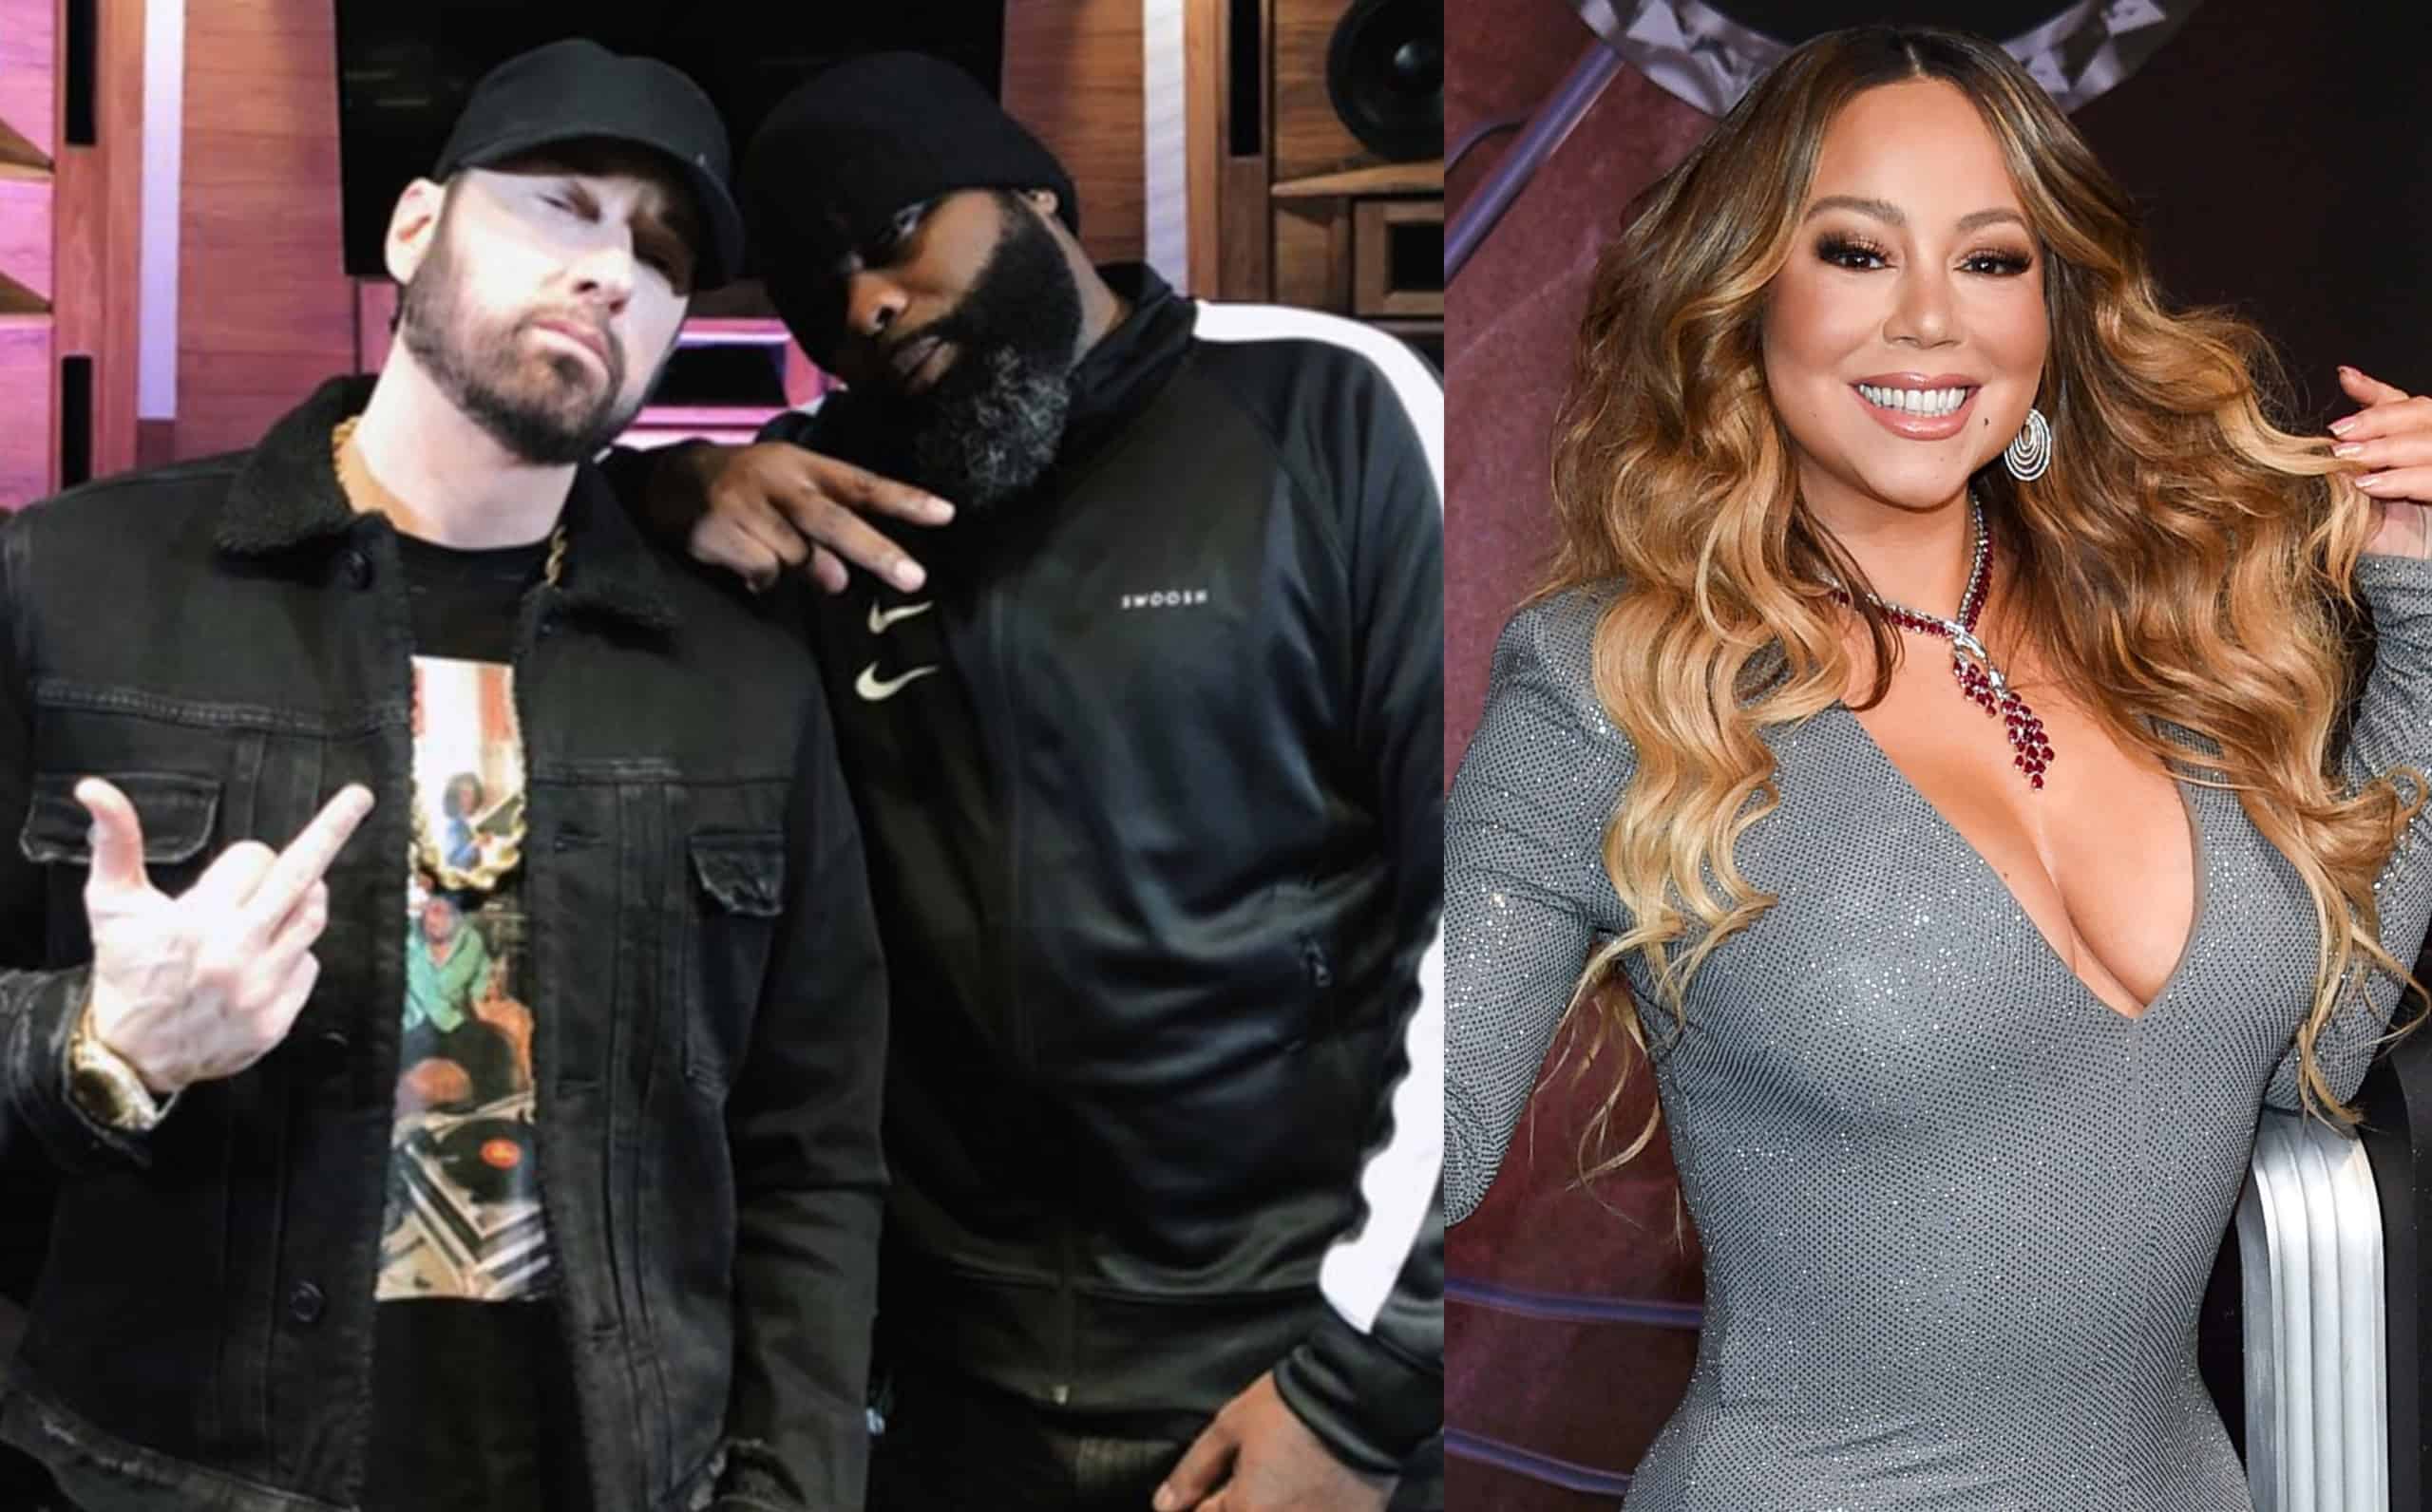 KXNG Crooked Says That Eminem Doesn't Give A Fk About Mariah Carey